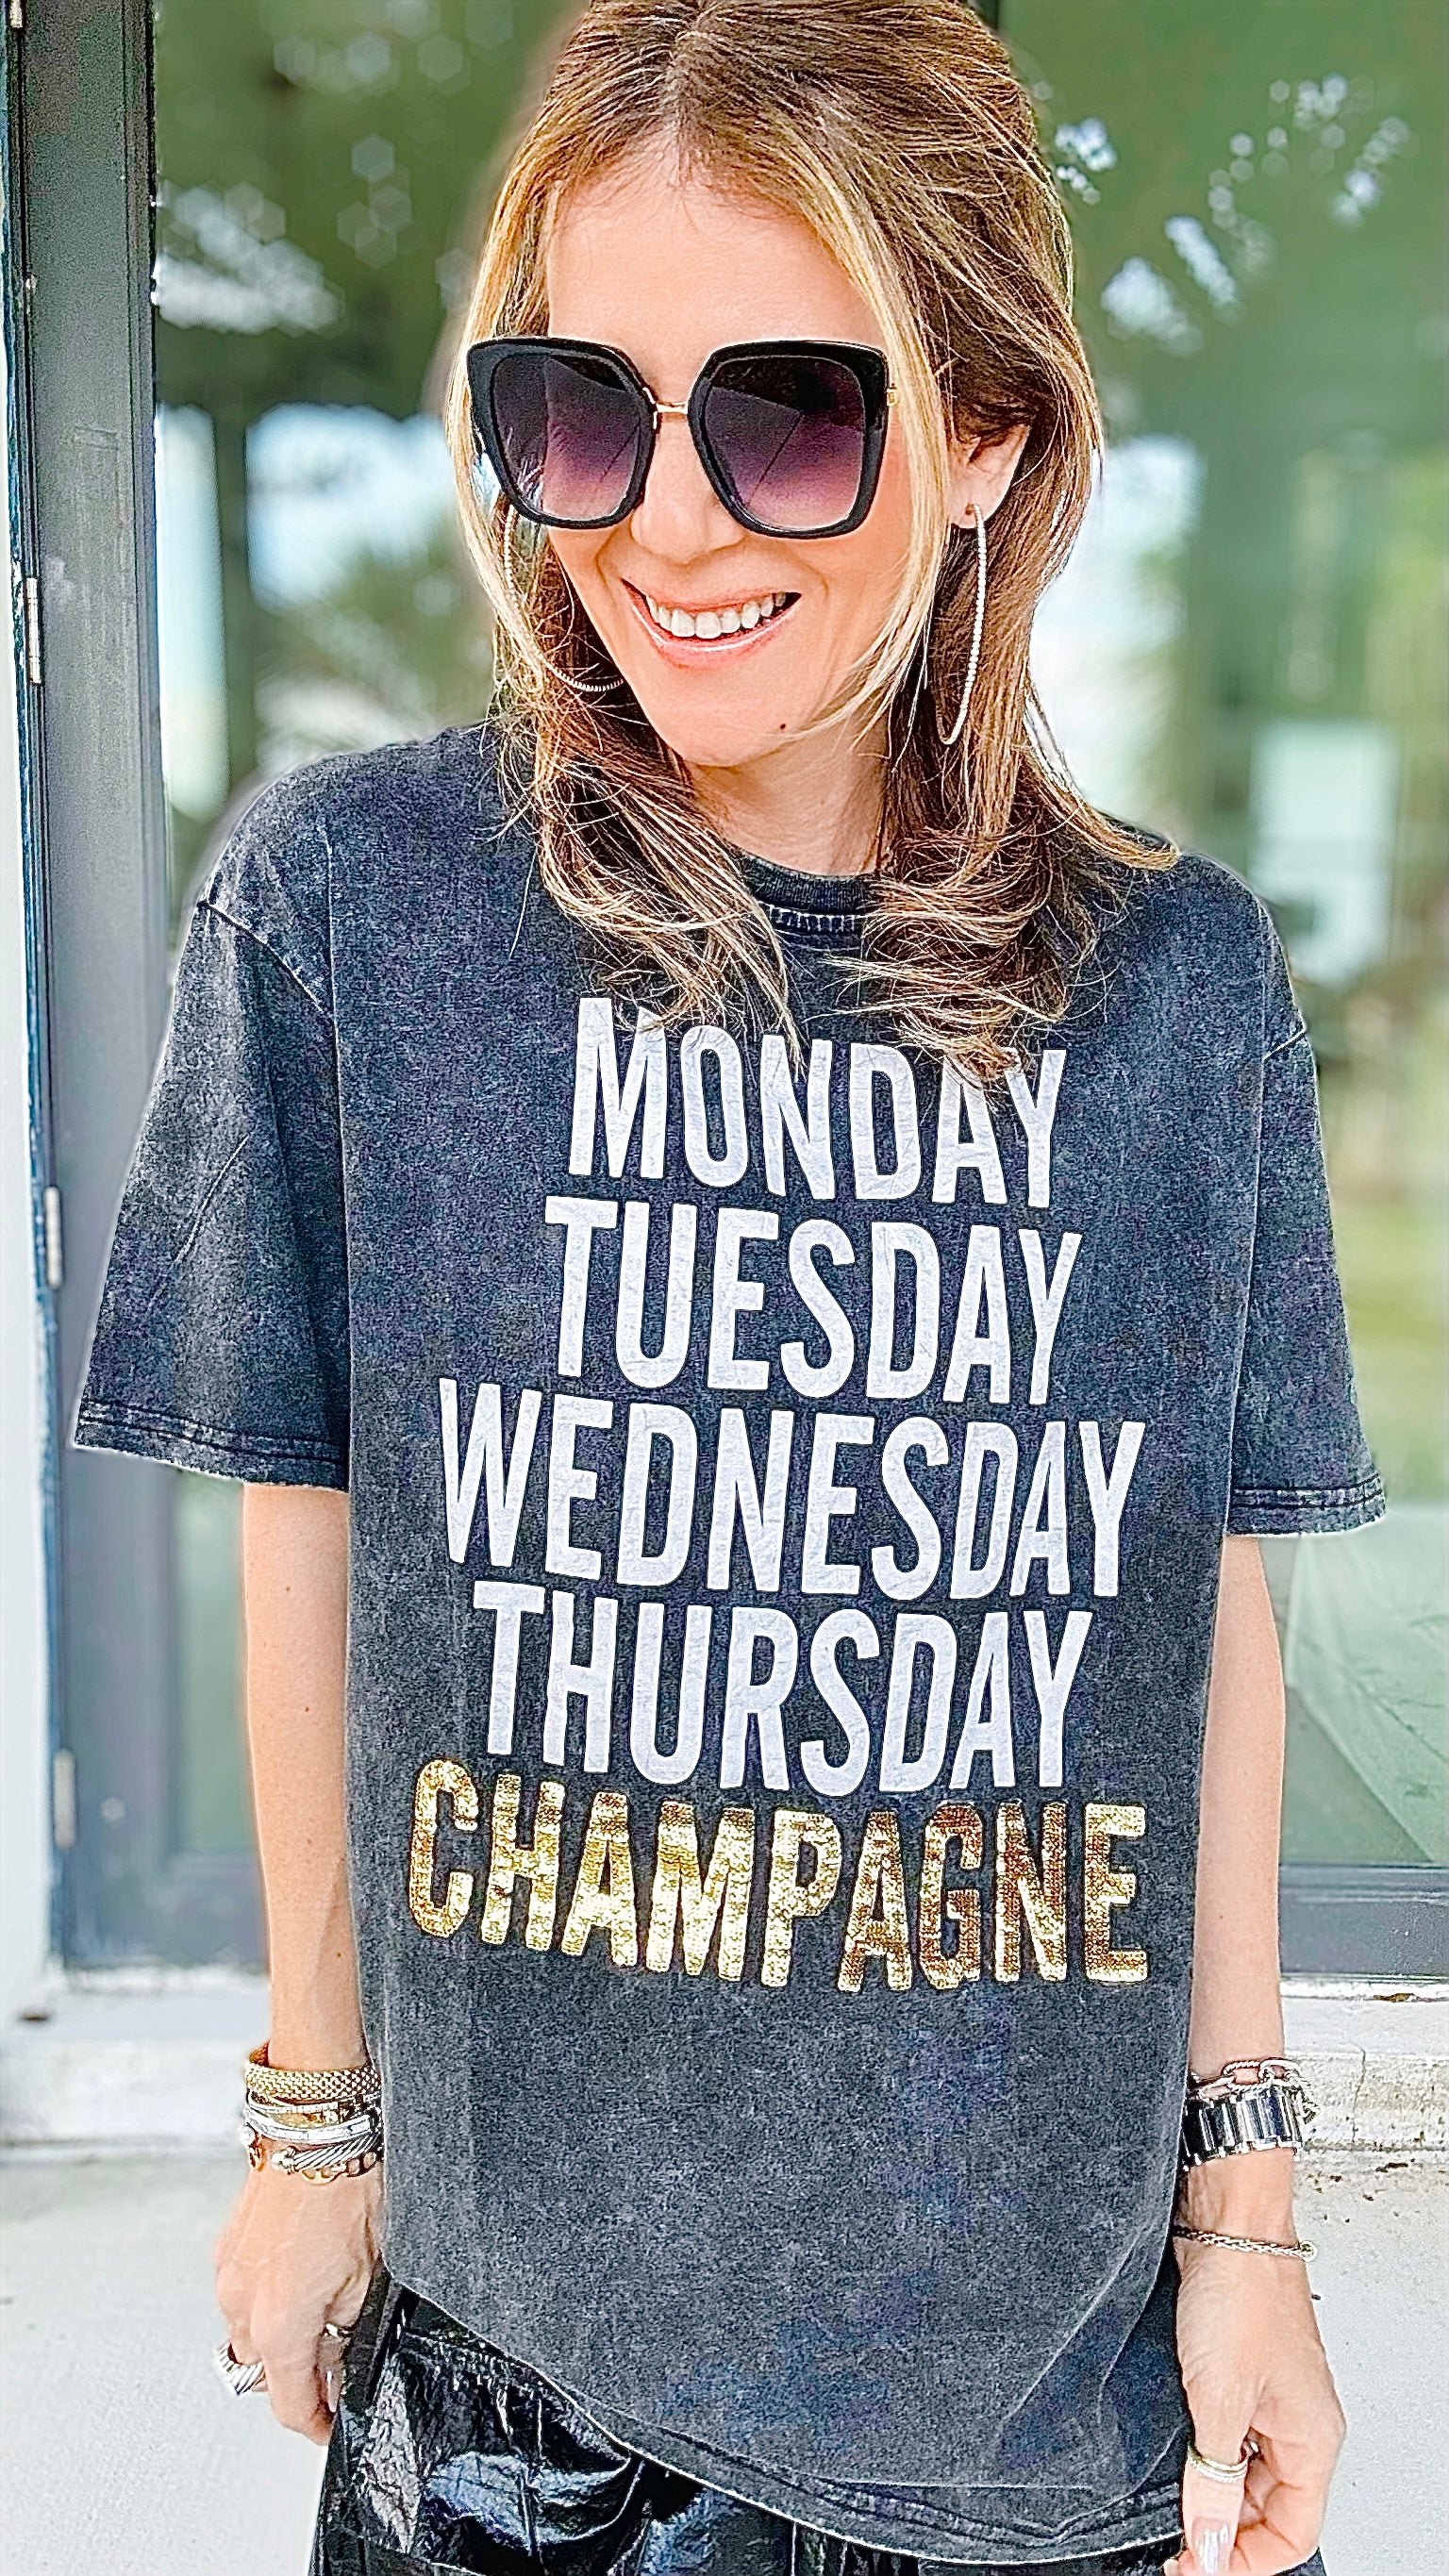 Champagne Days Sequin Trim Shirt-110 Short Sleeve Tops-Main Strip-Coastal Bloom Boutique, find the trendiest versions of the popular styles and looks Located in Indialantic, FL